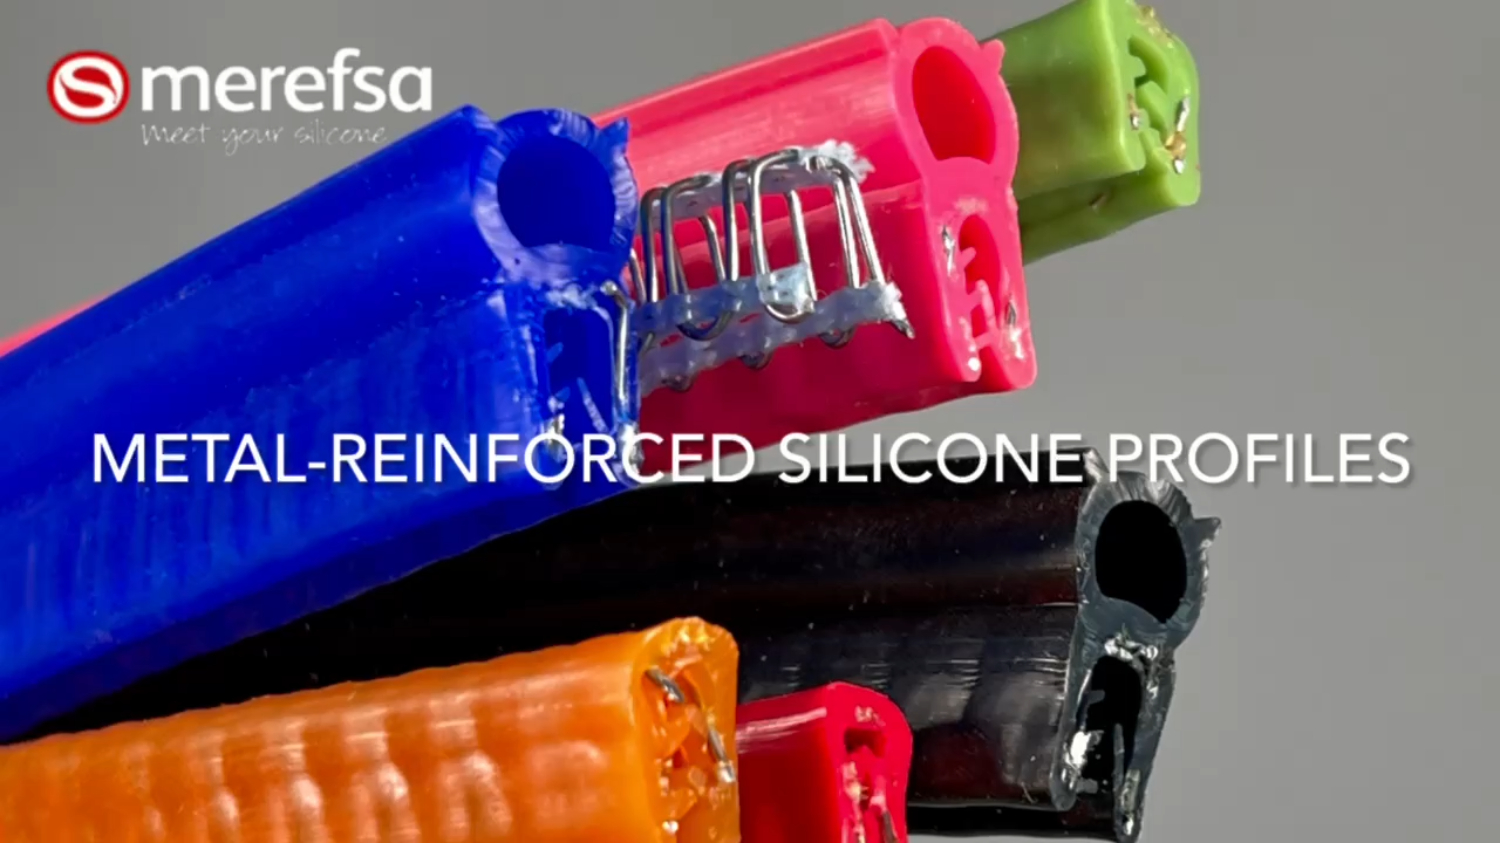 Metal-reinforced silicone profiles